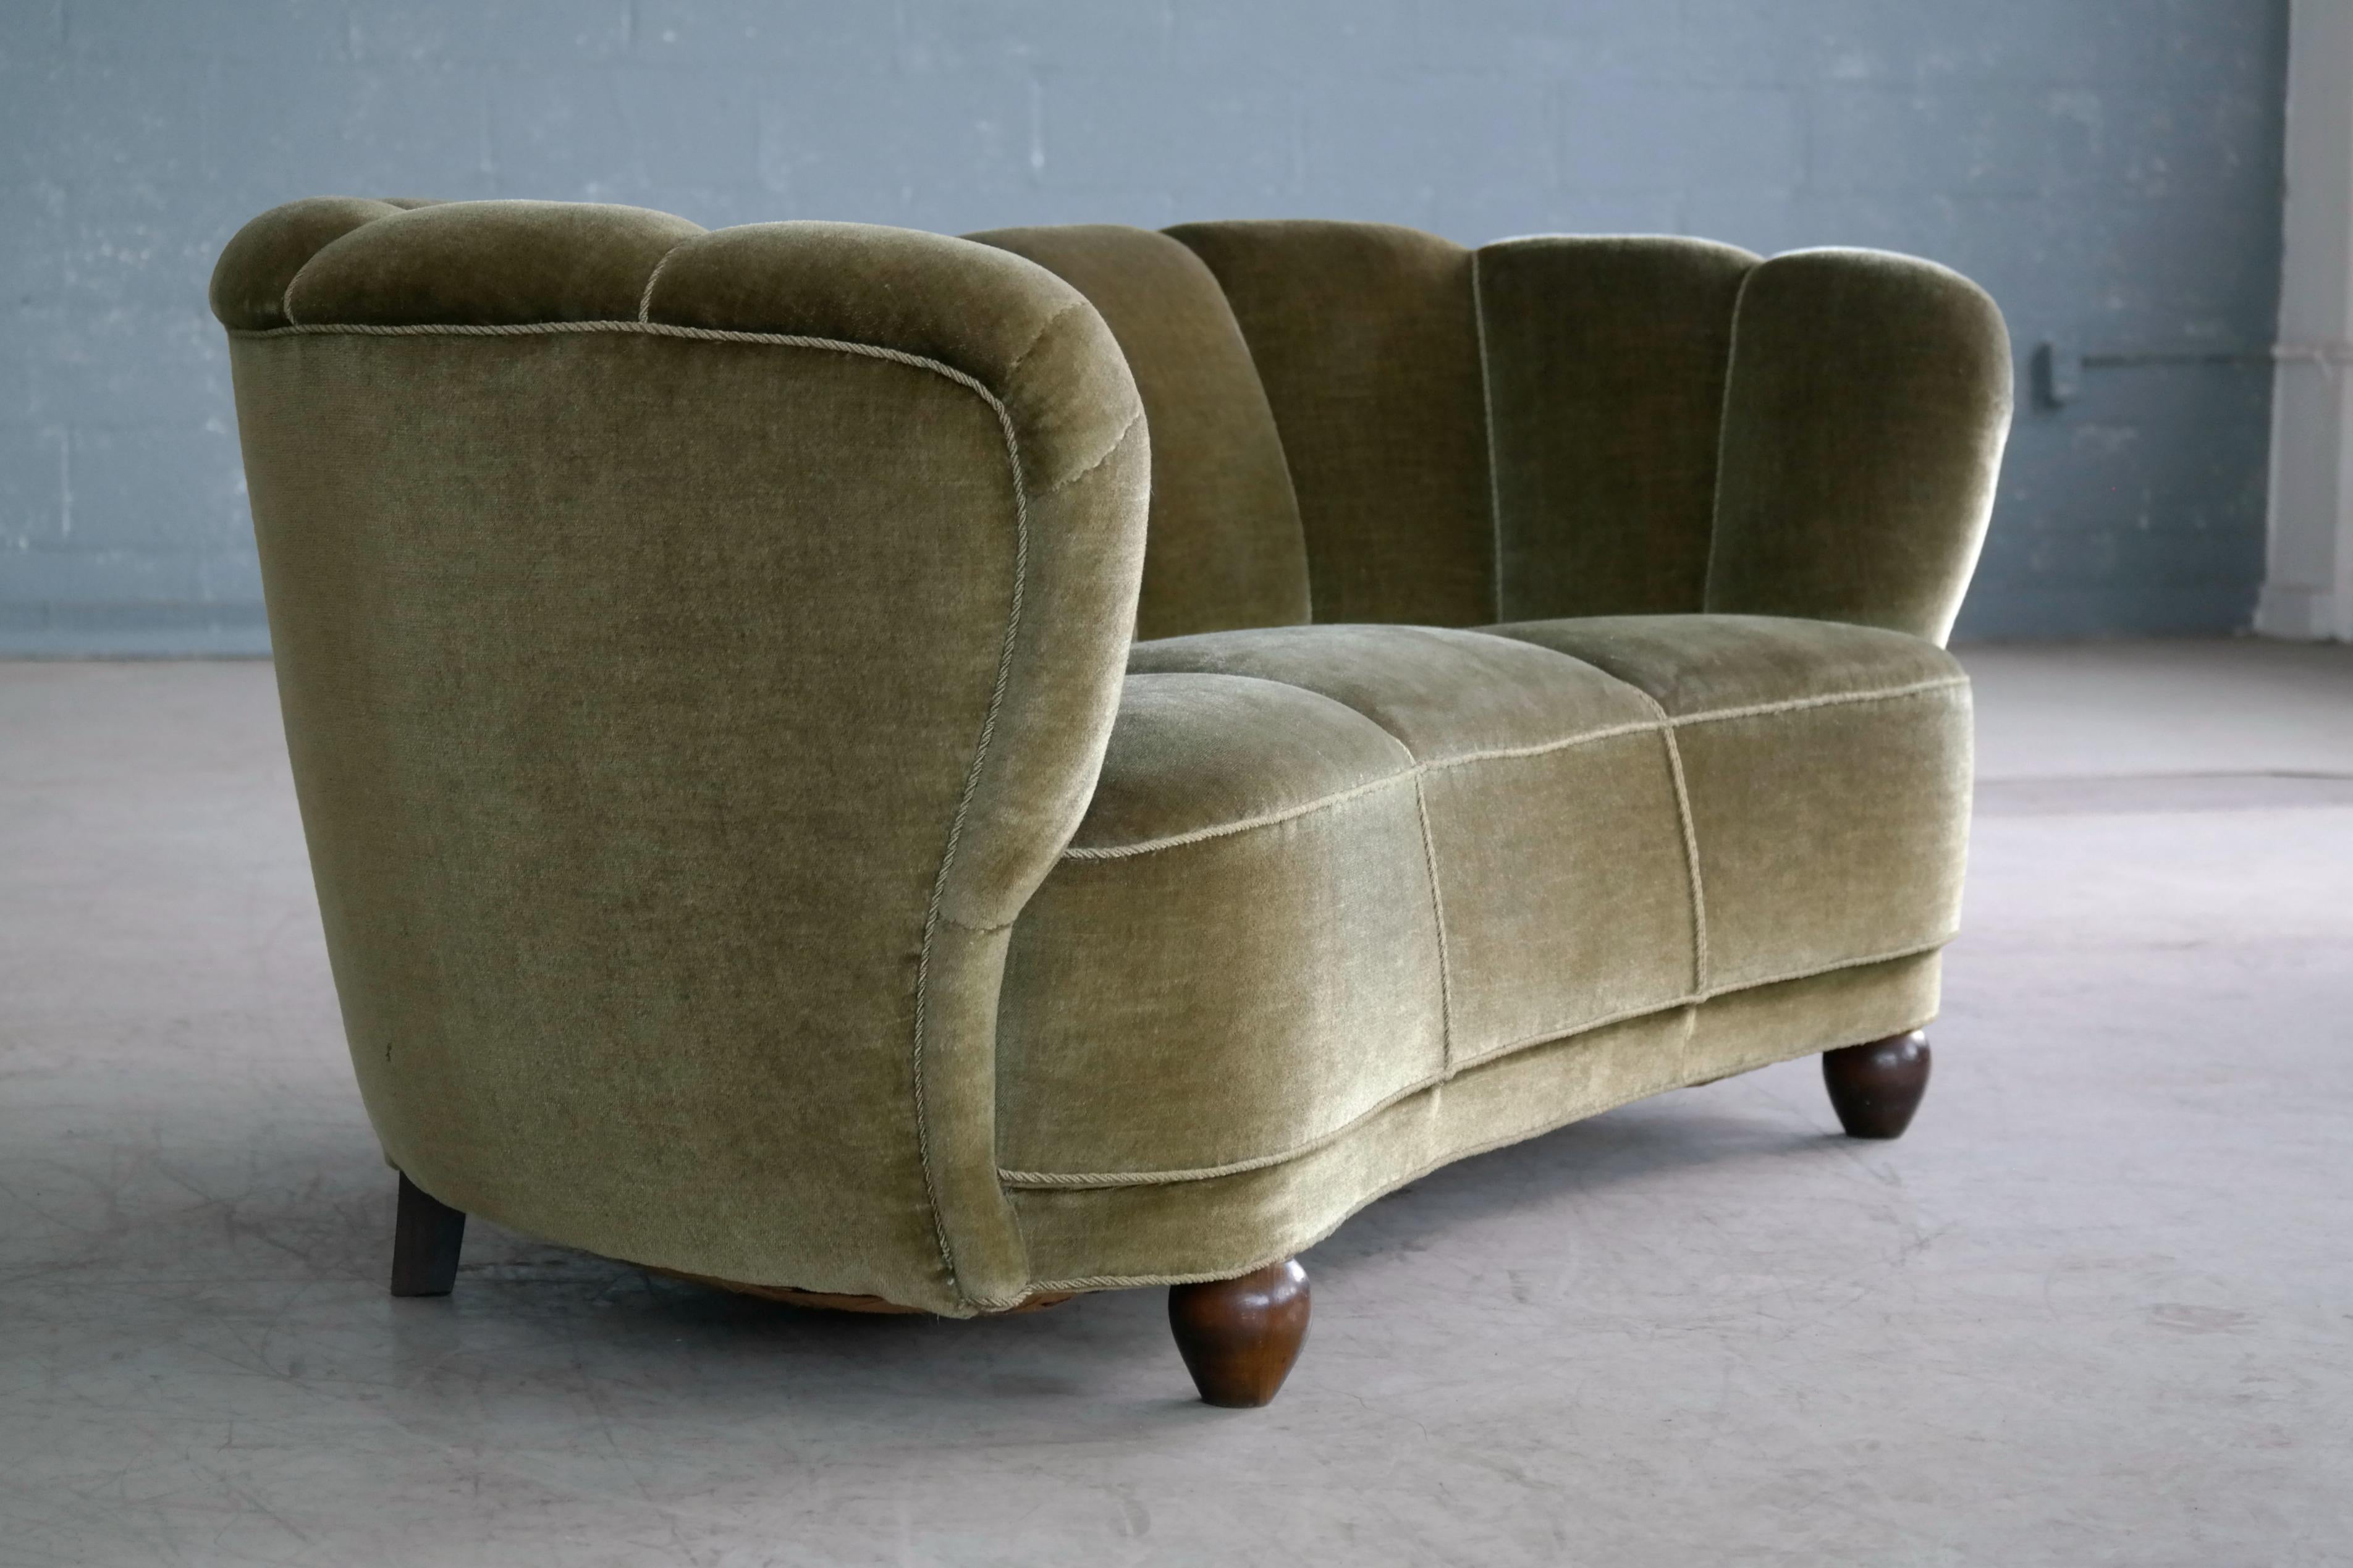 Mid-20th Century Danish Midcentury Curved or Banana Form Sofa in Beech and Mohair, 1940s